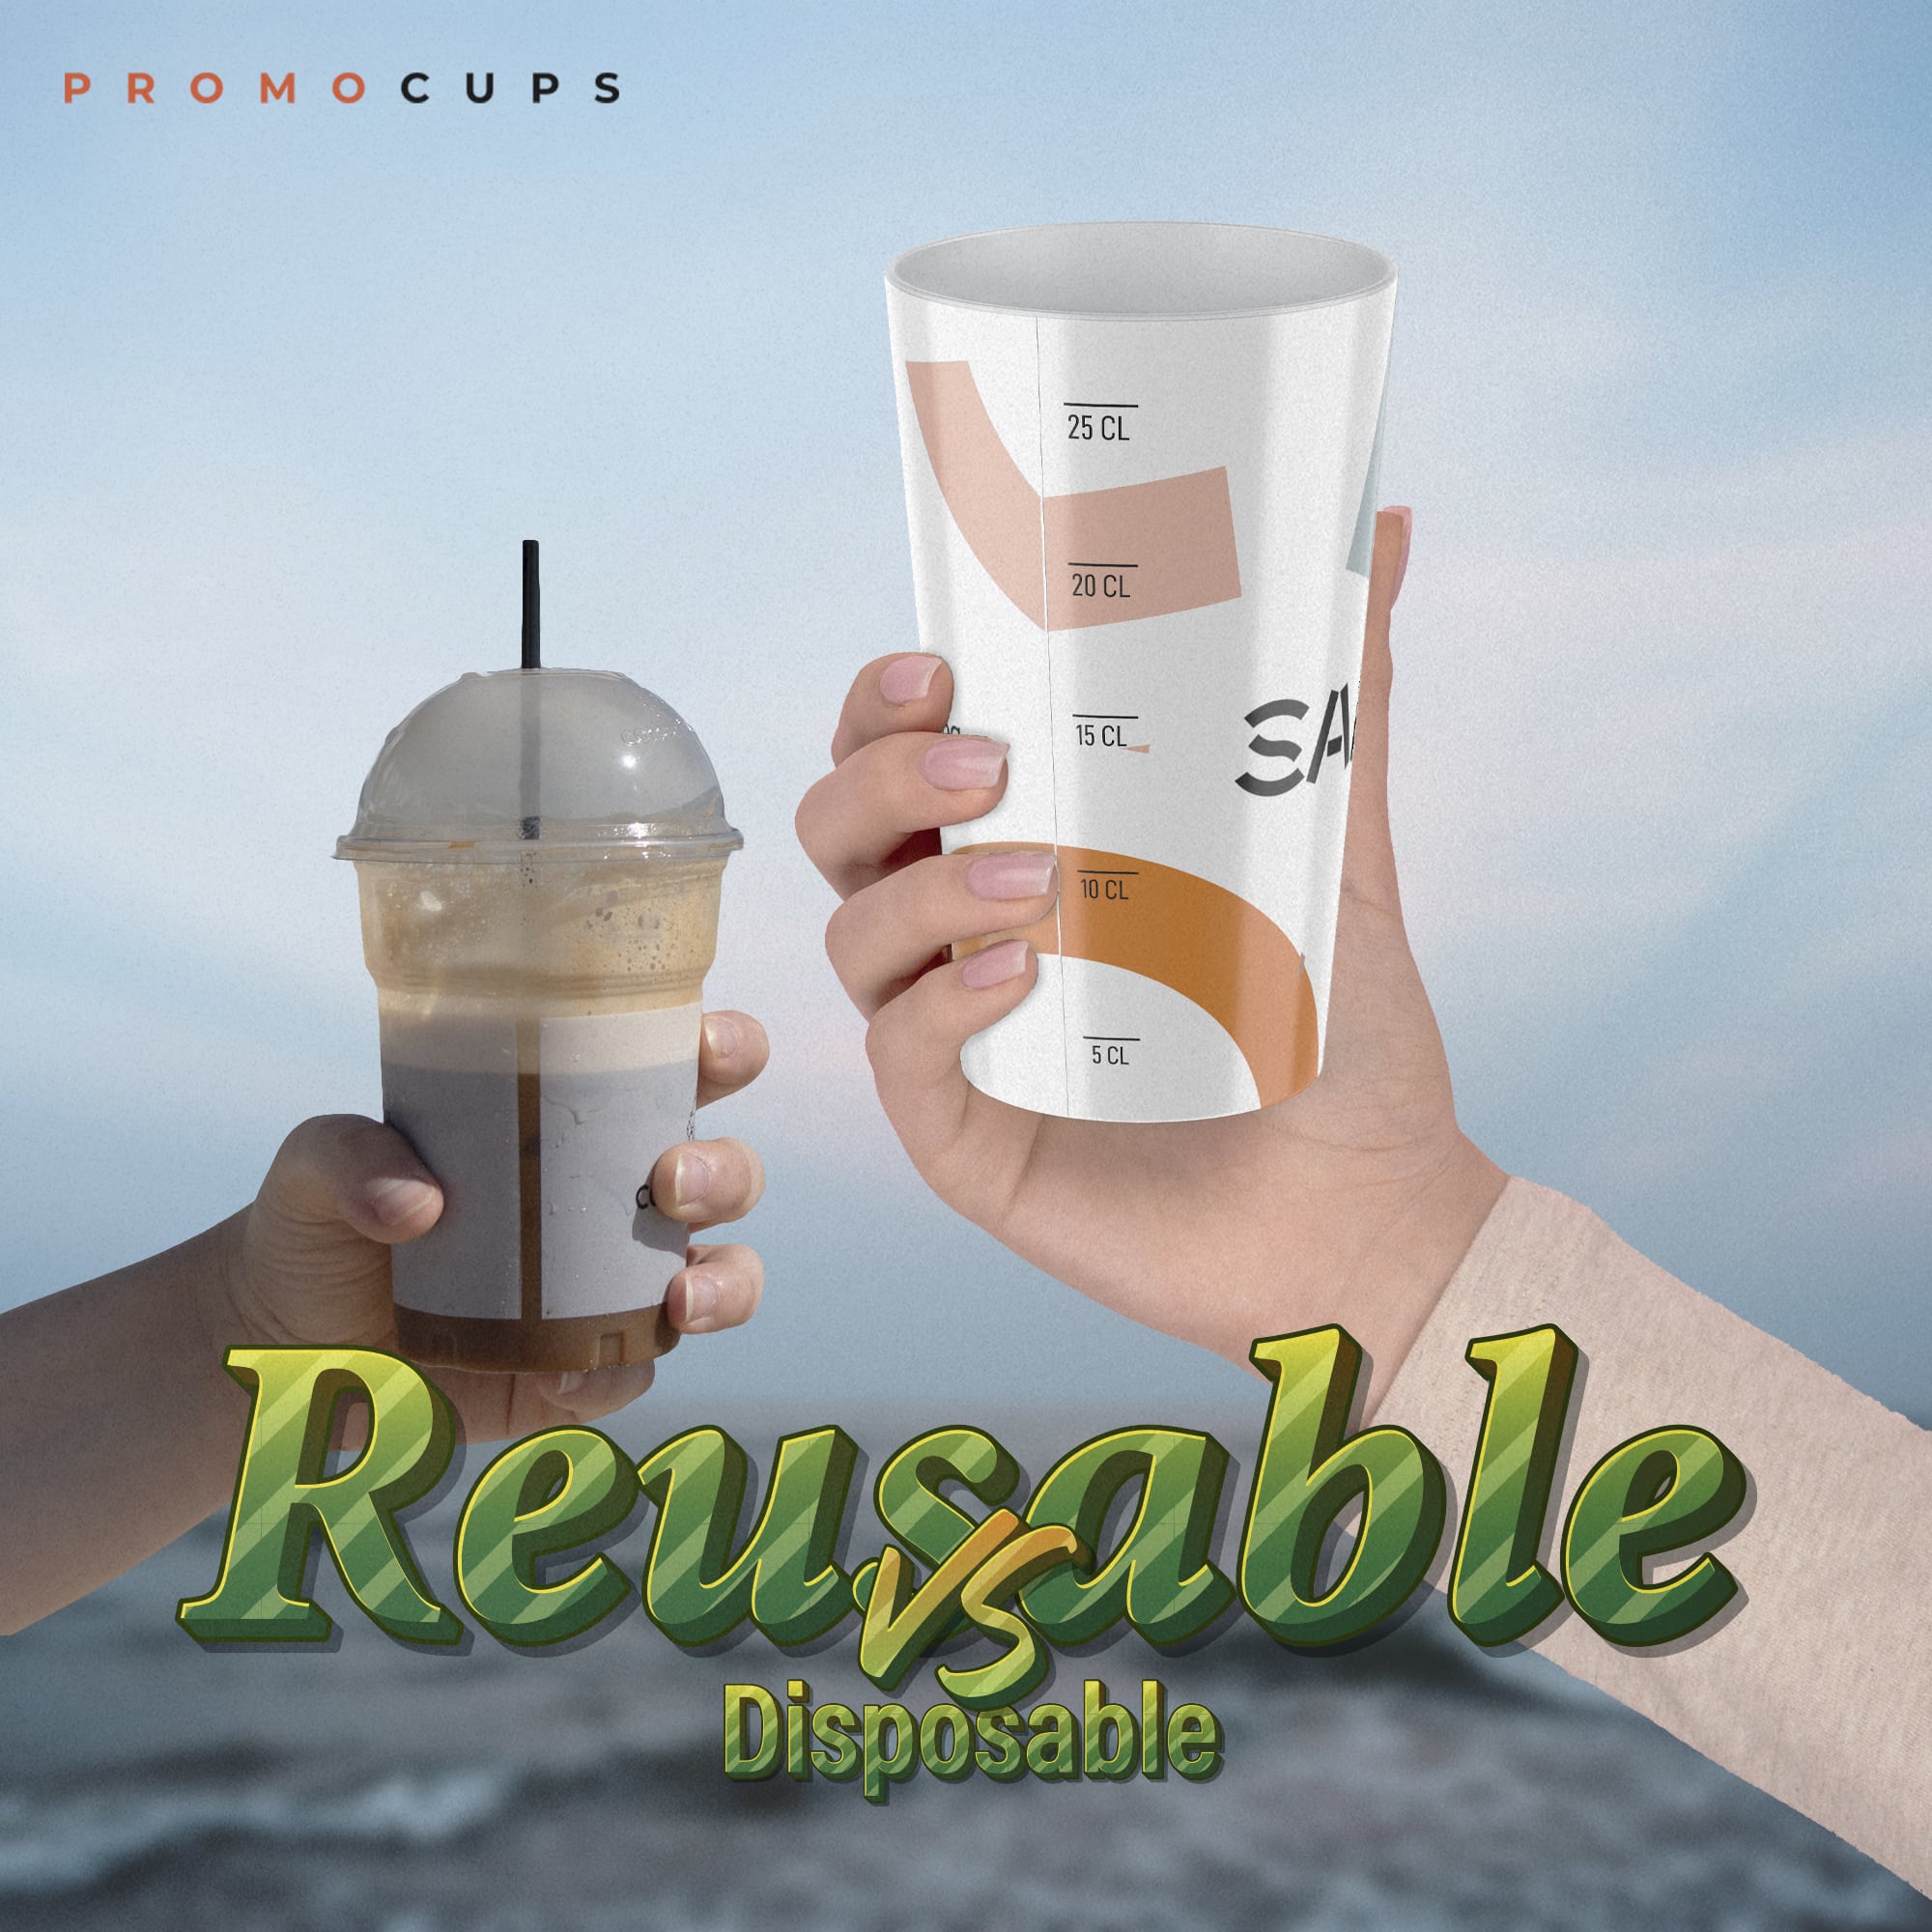 Reusable cups versus disposable cups: The benefits of reusable cups